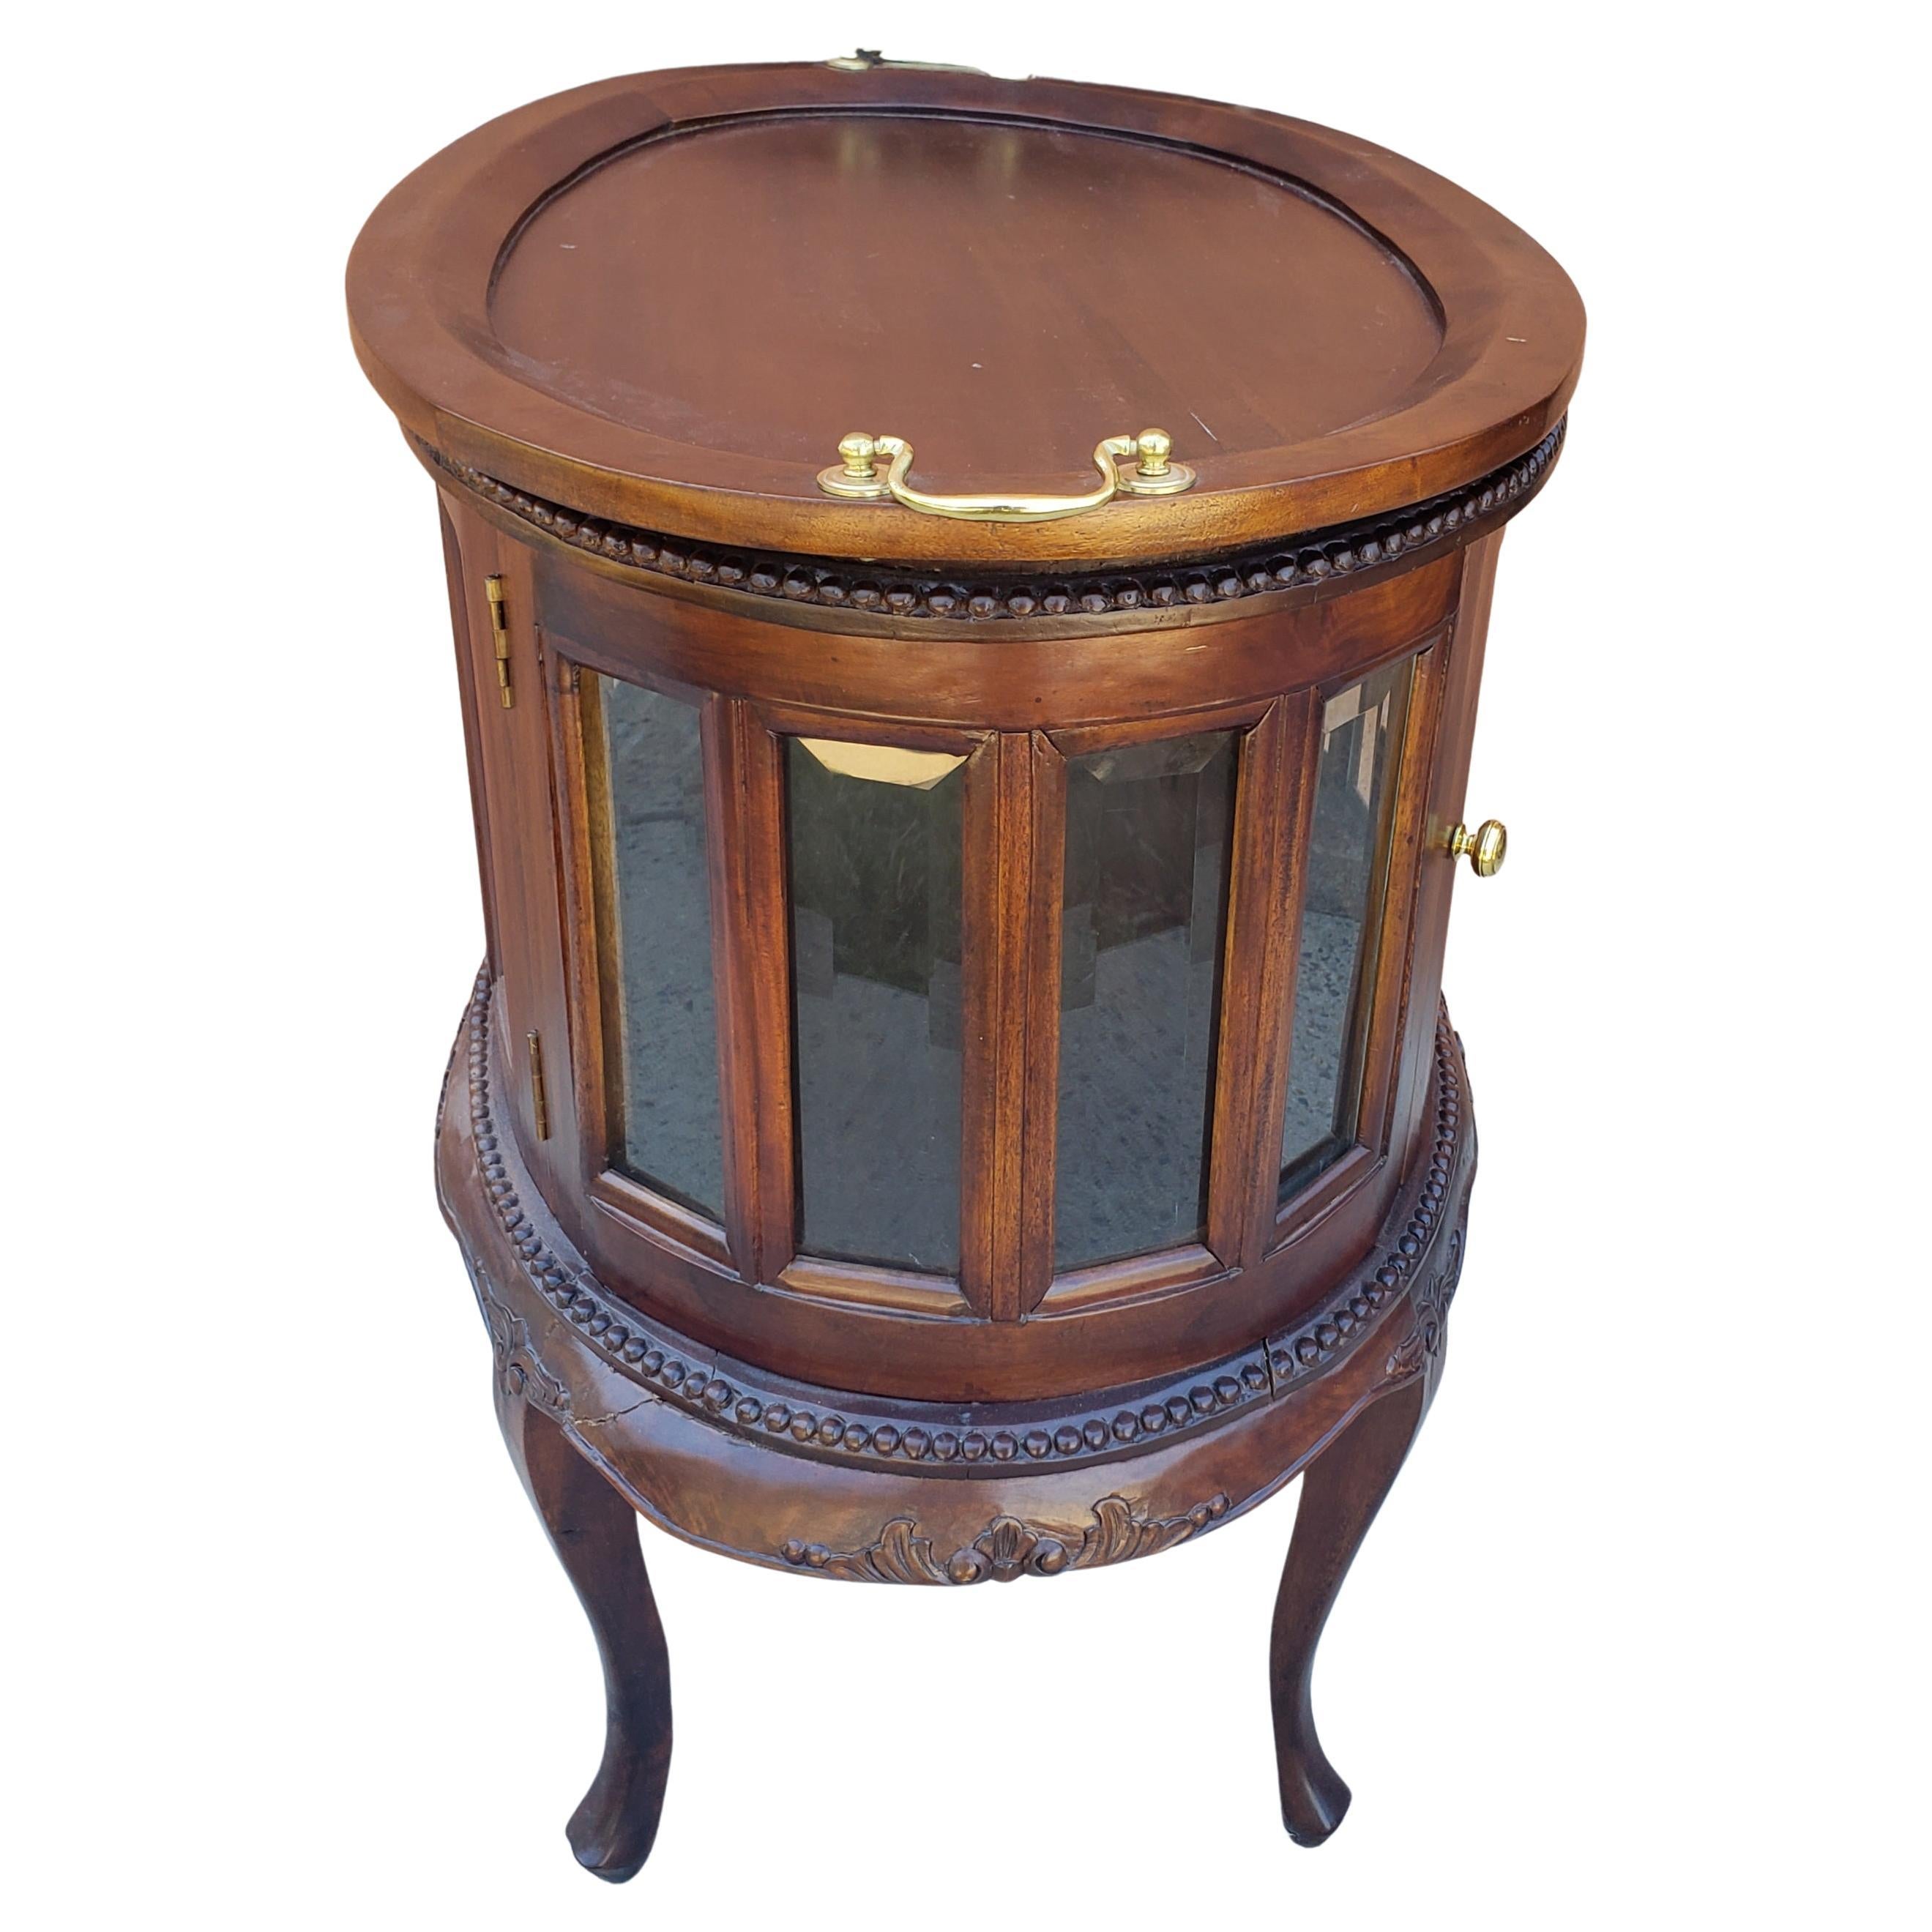 An exquisite George III style Mahogany oval vitrine table with removable two-handle tray top. Features two doors in front and rear and identically finished on both both side, making usable as a center table. Use to store your wine and liquor